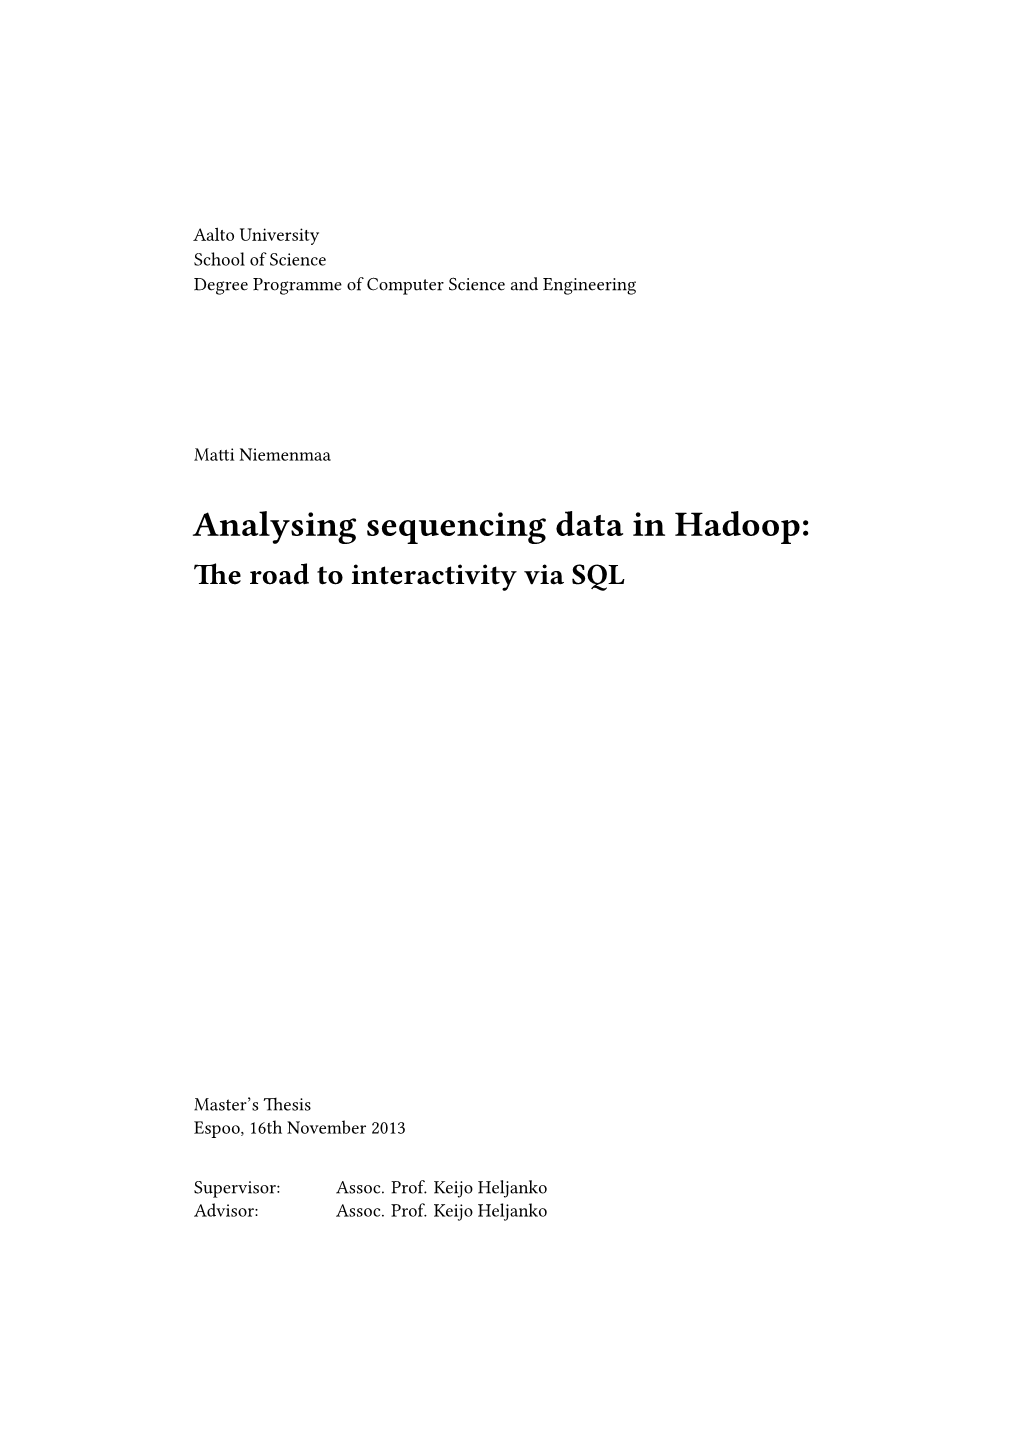 Analysing Sequencing Data in Hadoop: the Road to Interactivity Via SQL